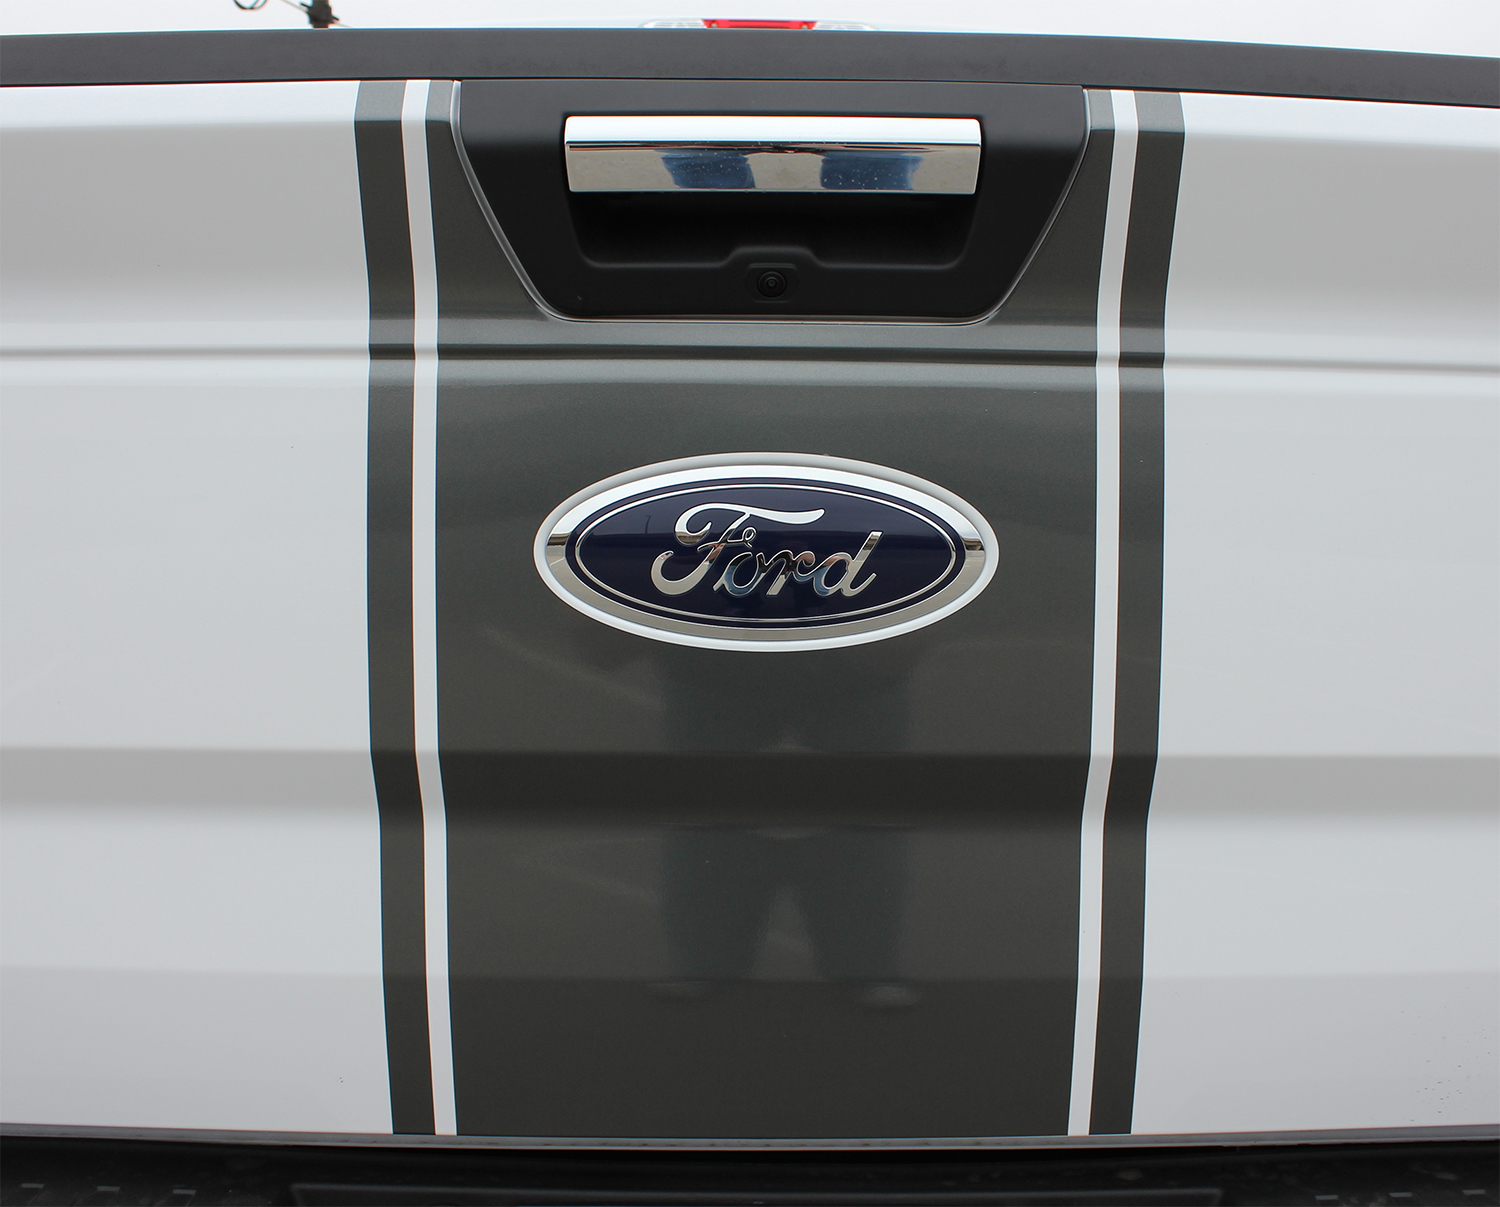 Ford F-Series F-150 - MoProAuto Pro Design Series Vinyl Graphics and Decals Kit